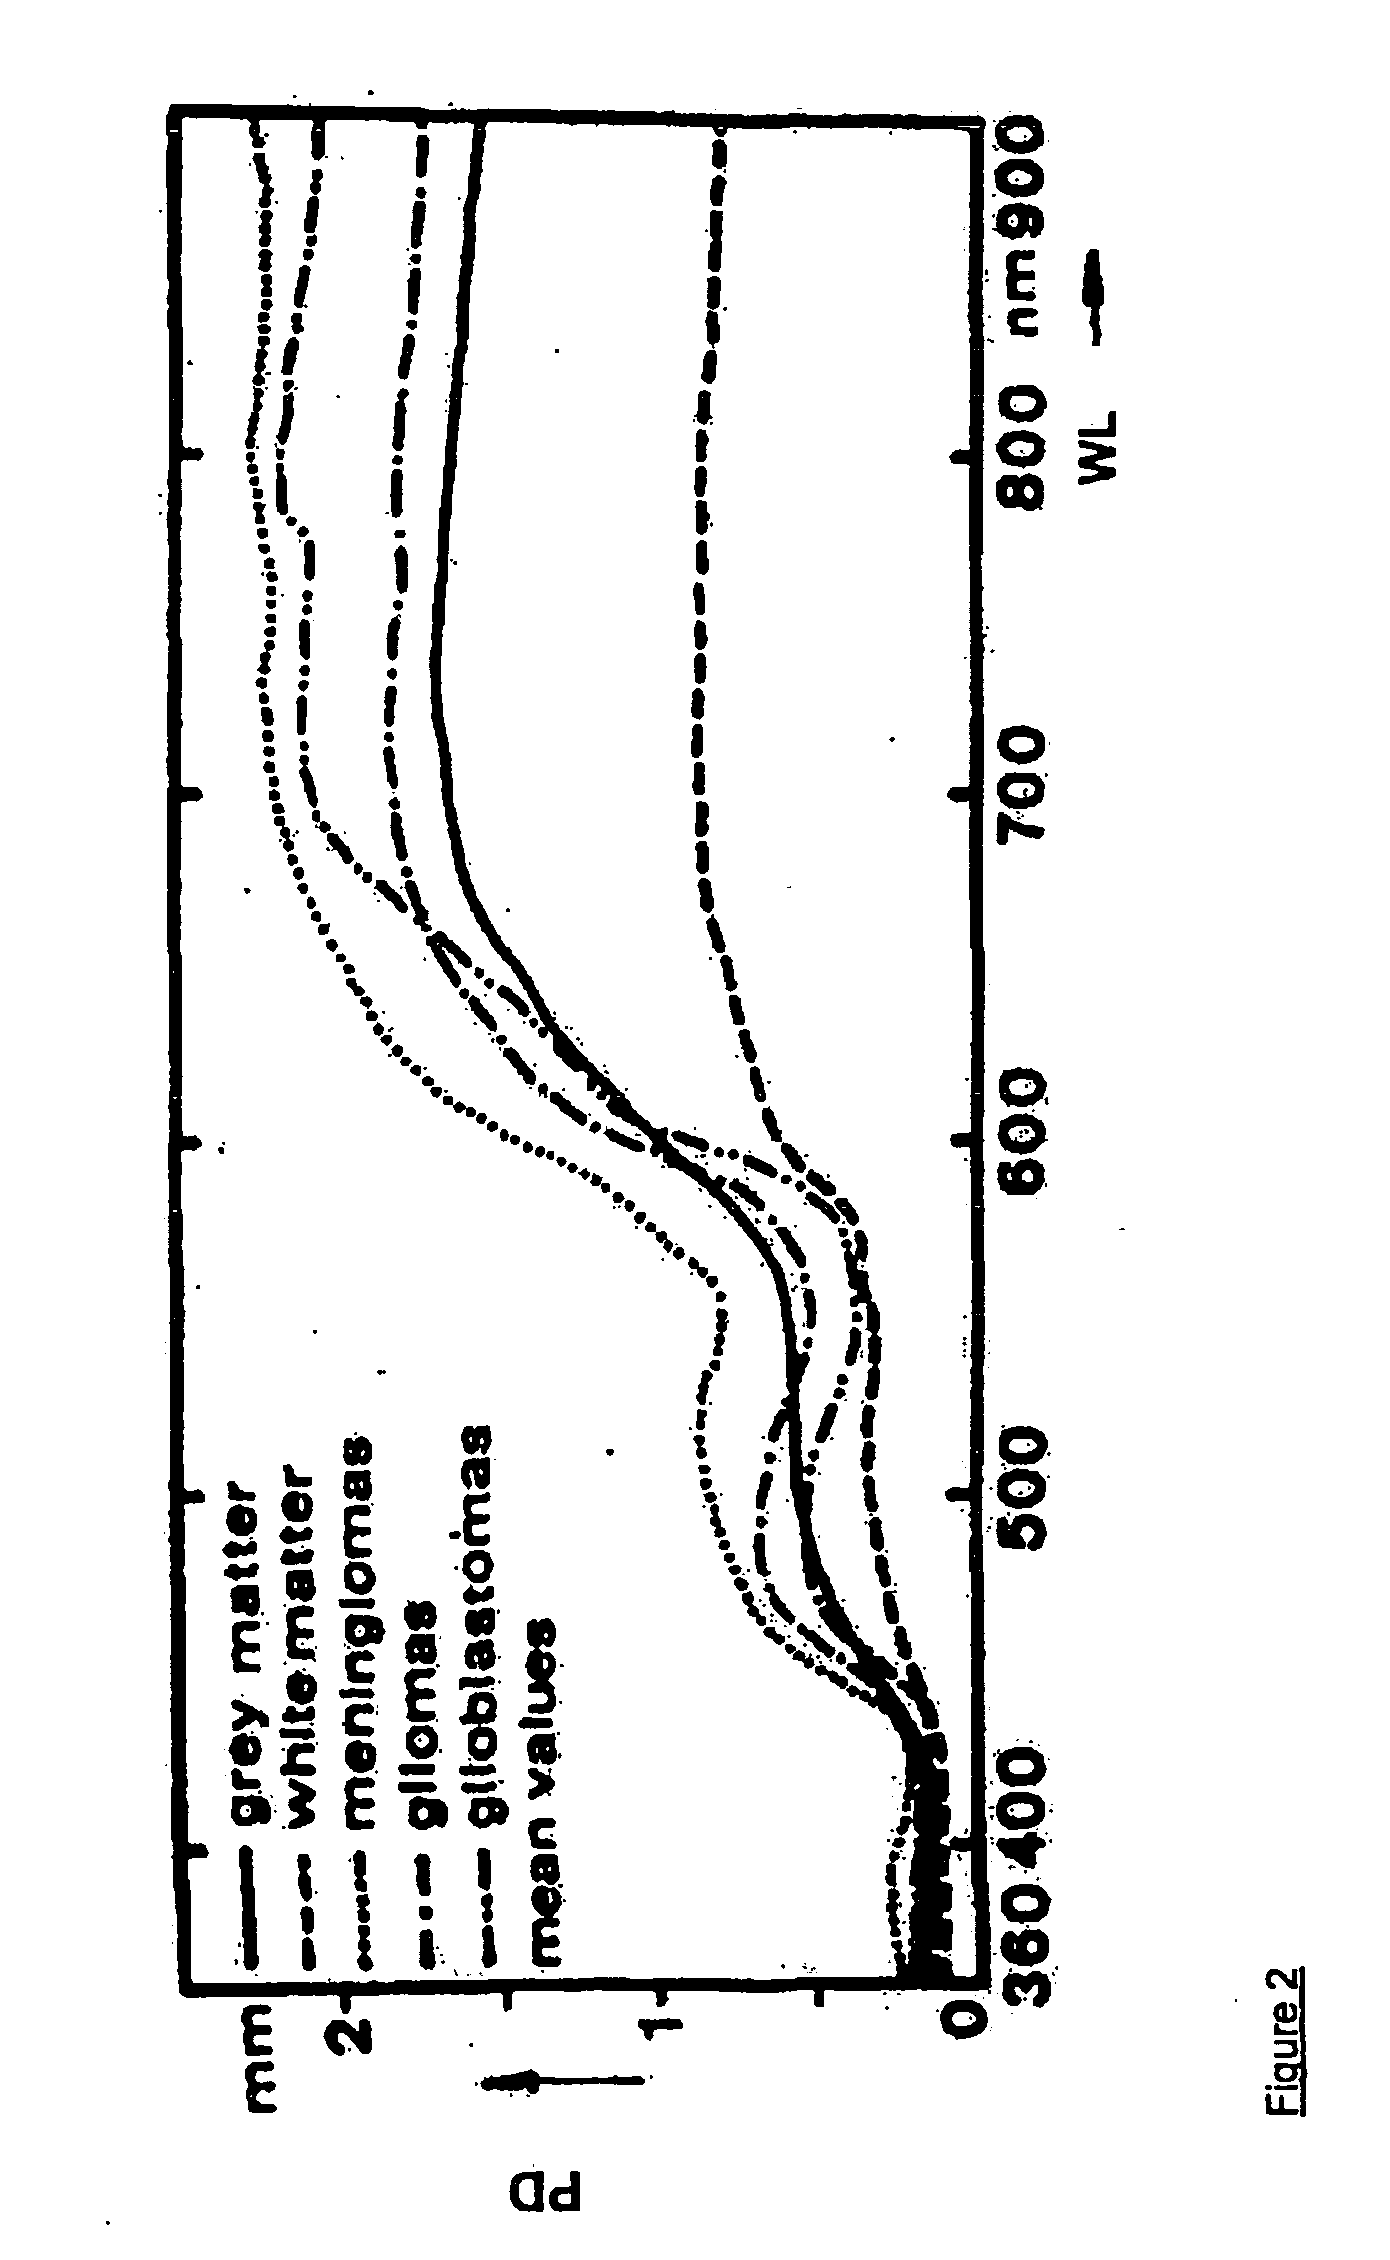 Multiparametric apparatus for monitoring multiple tissue vitality parameters